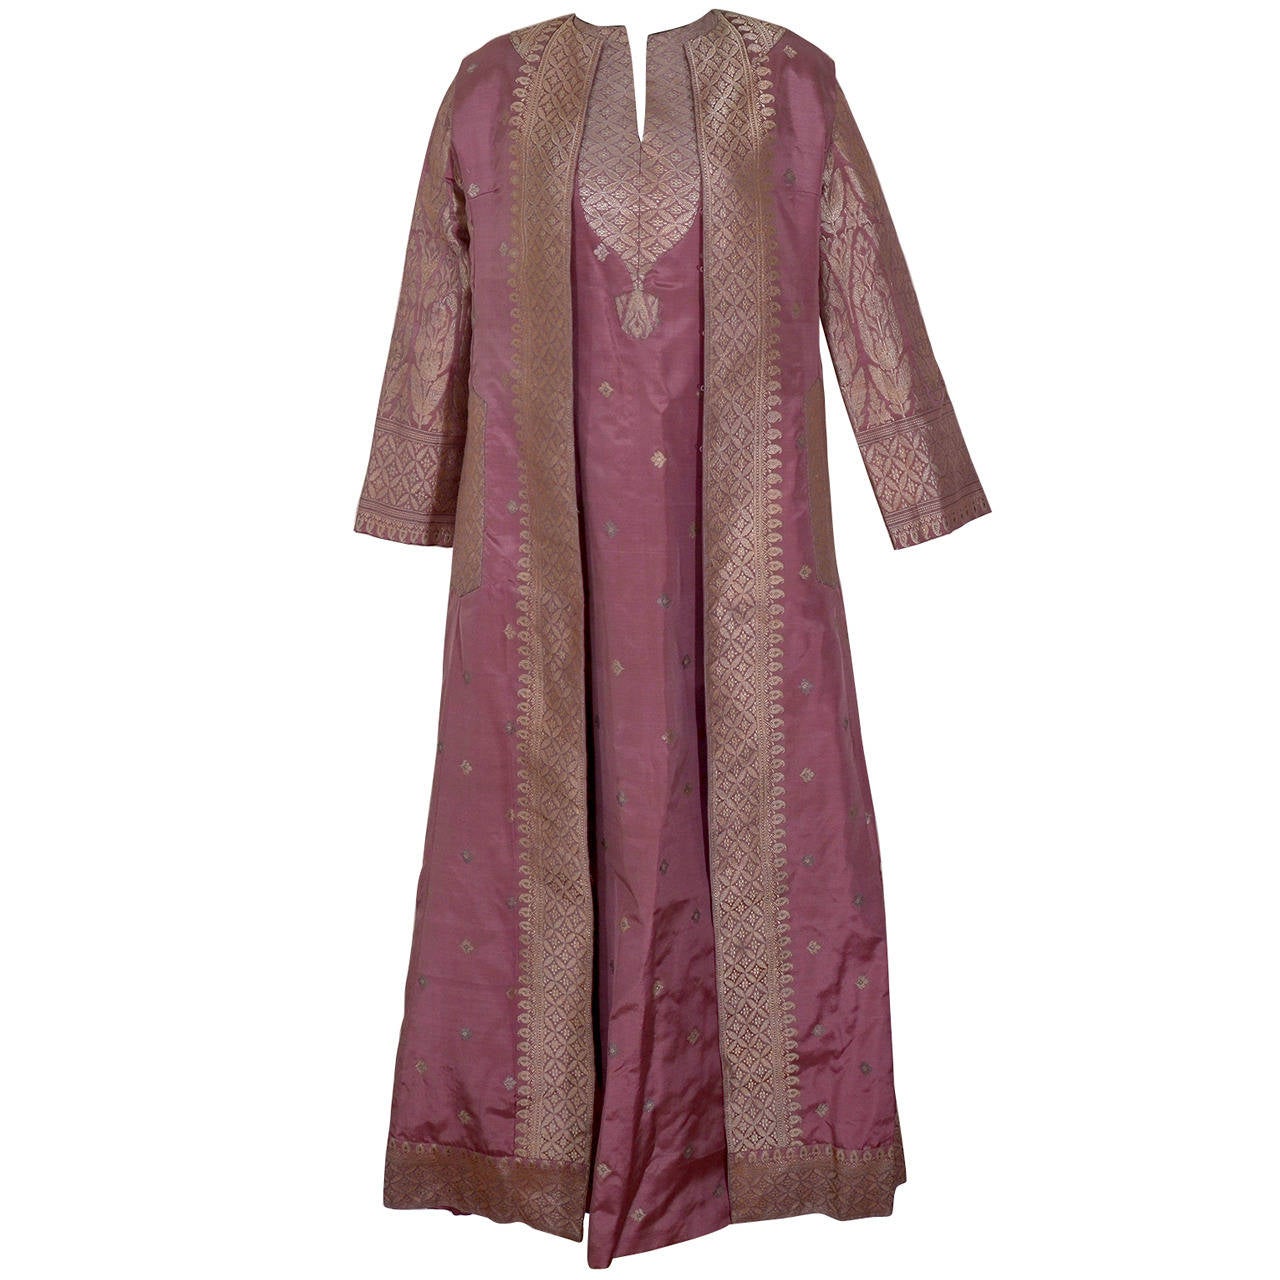 Magnificent Virginia Witbeck Couture Evening Caftan and Coat For Sale